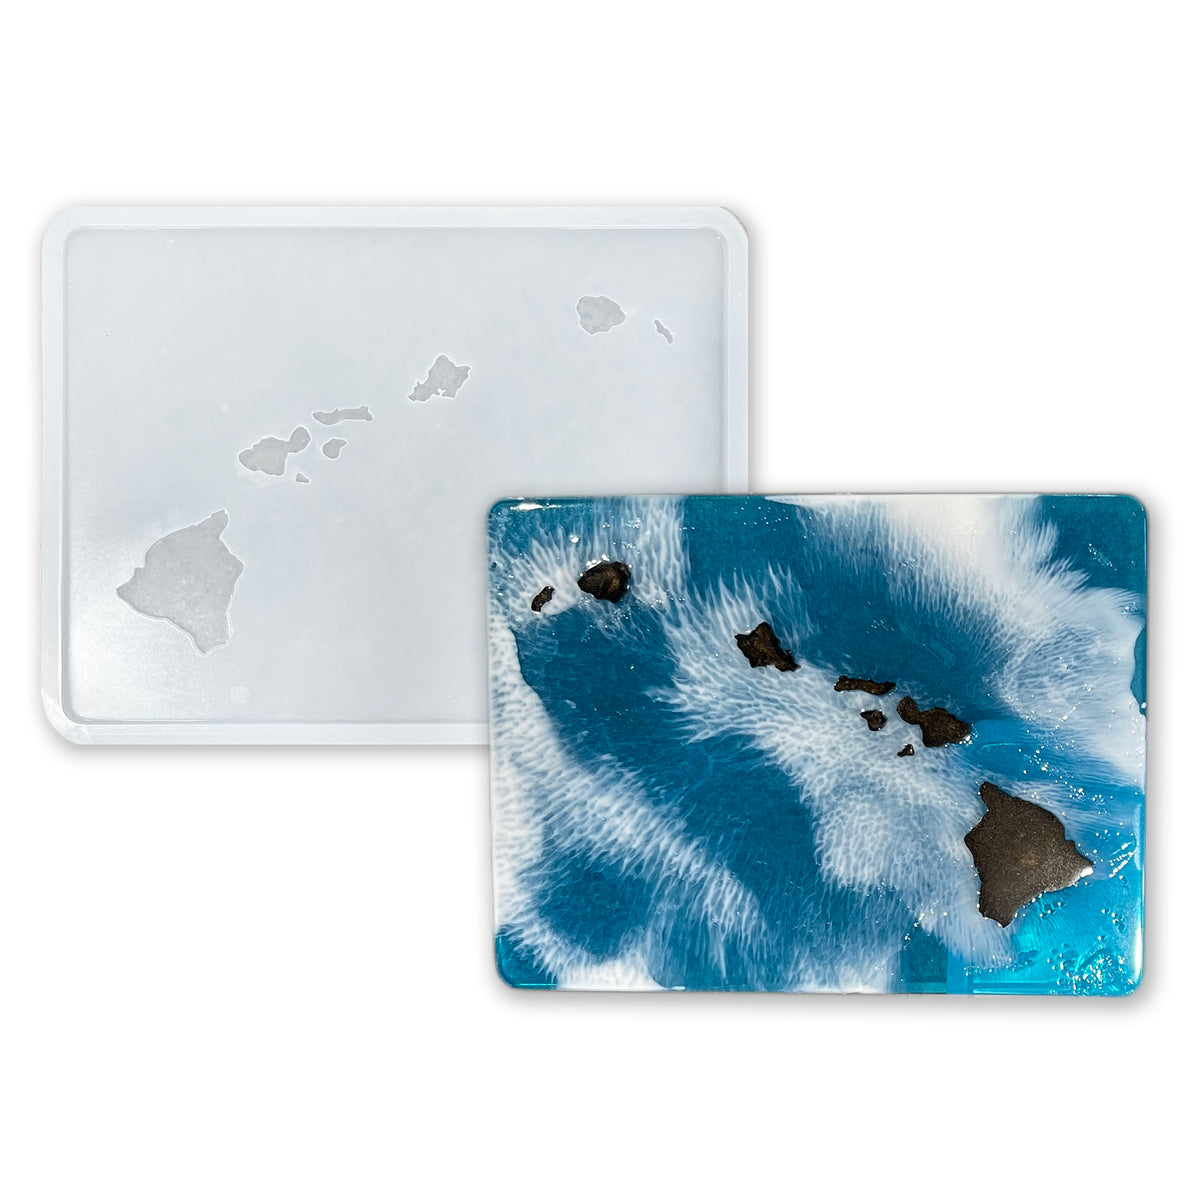  FineInno 3Pcs Ocean Resin Molds Island Silicone Molds